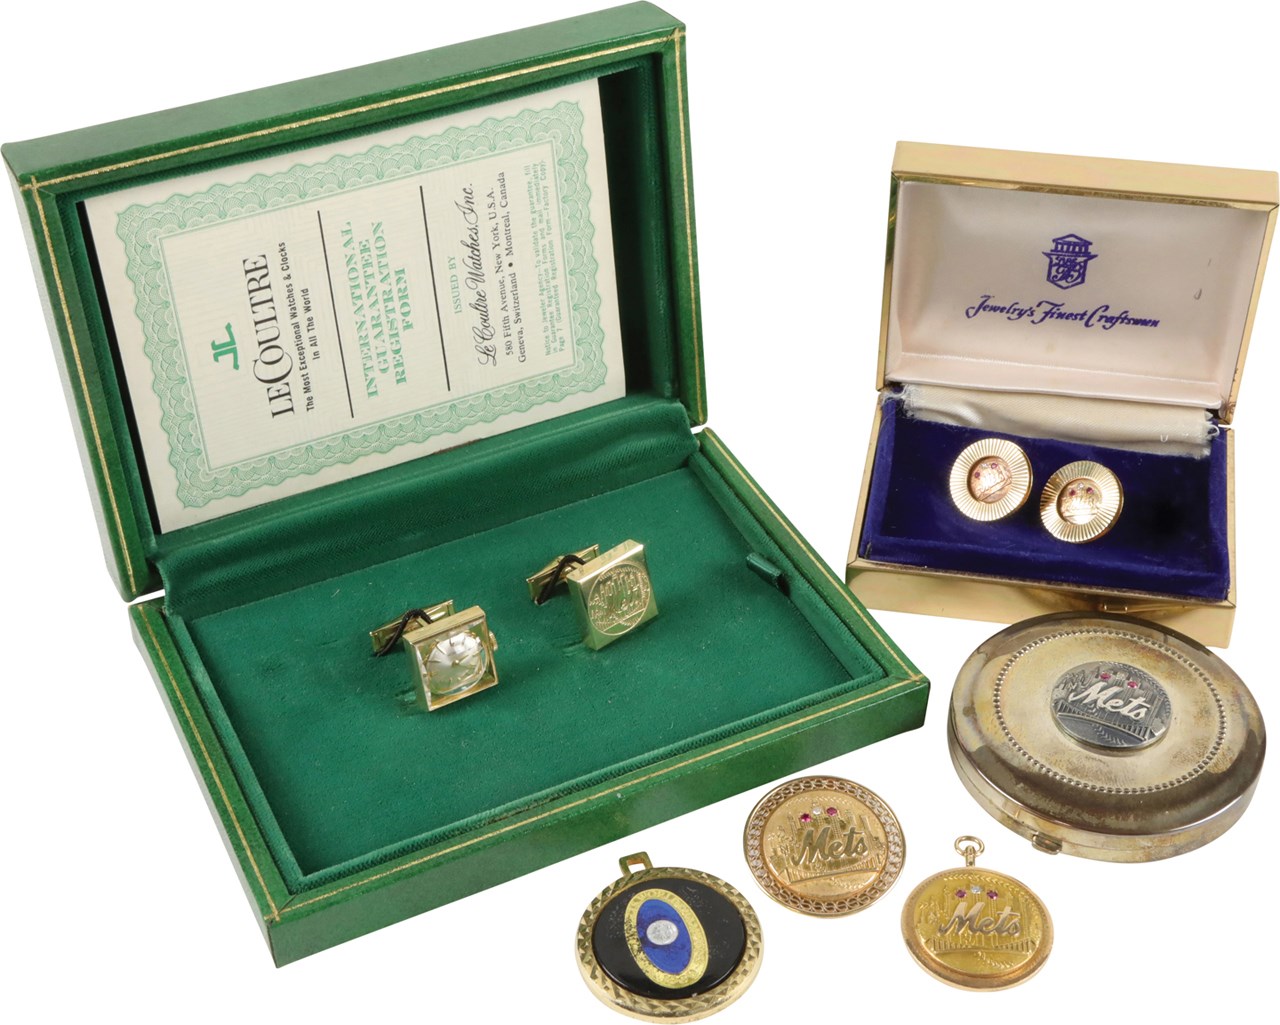 - New York Mets Jewelry Collection Gifted by Bill Shea (6)